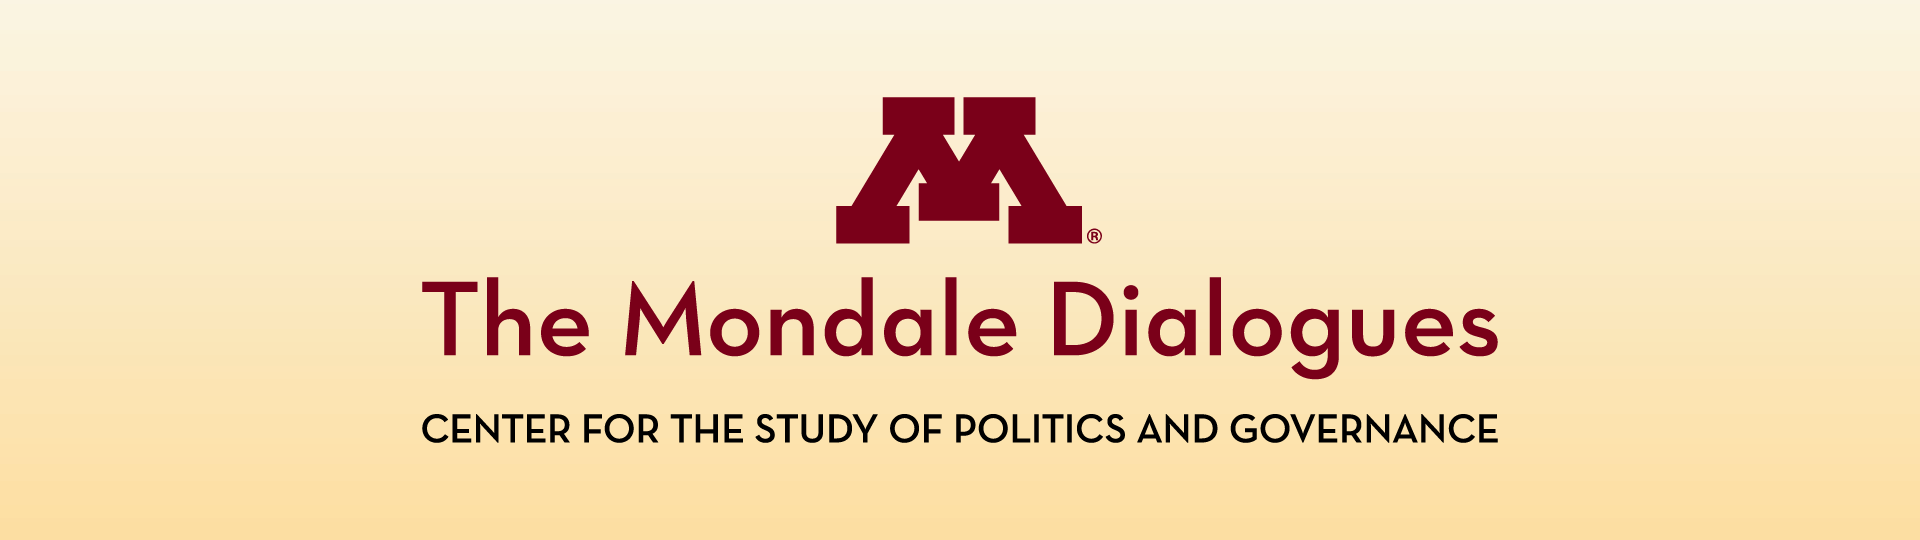 The Mondale Dialogues - Center for the Study of Politics and Governance